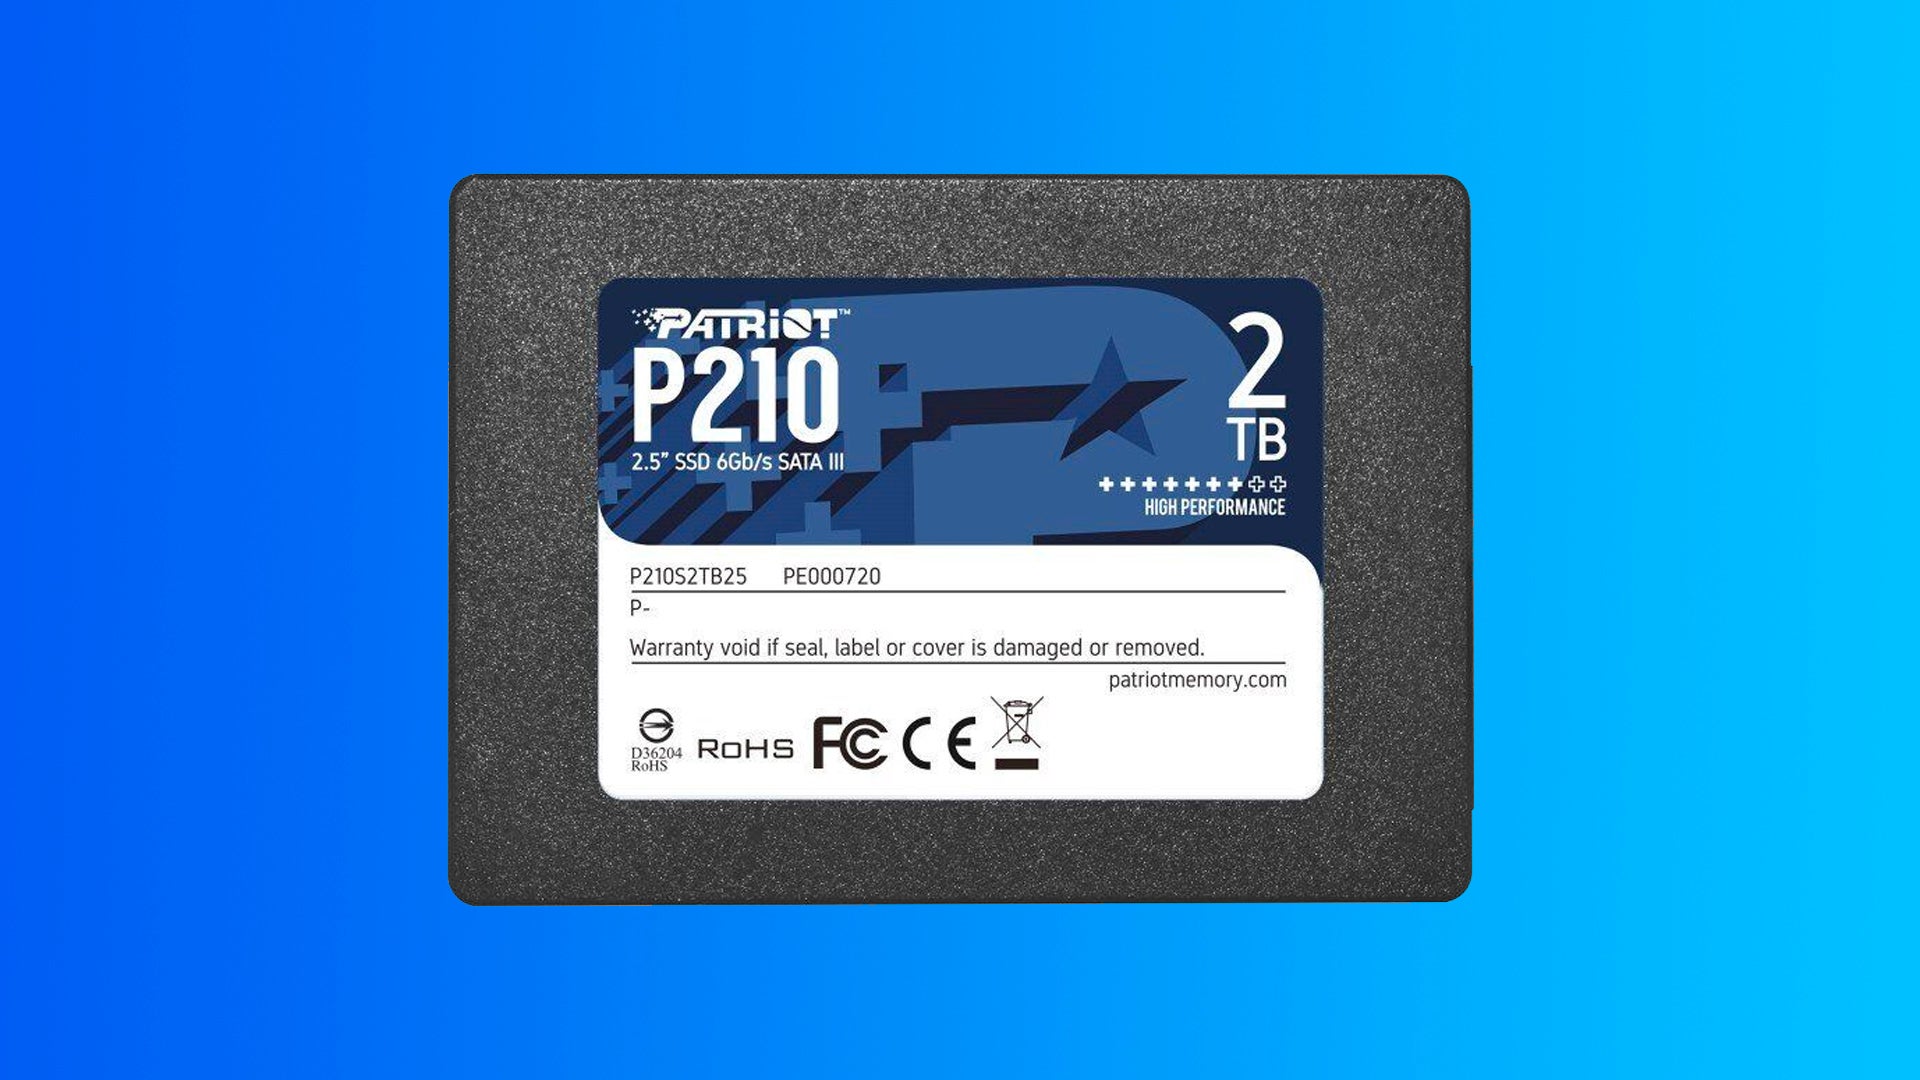 Image for Nab this steal of an eBay deal on the Patriot P210 2TB SATA SSD